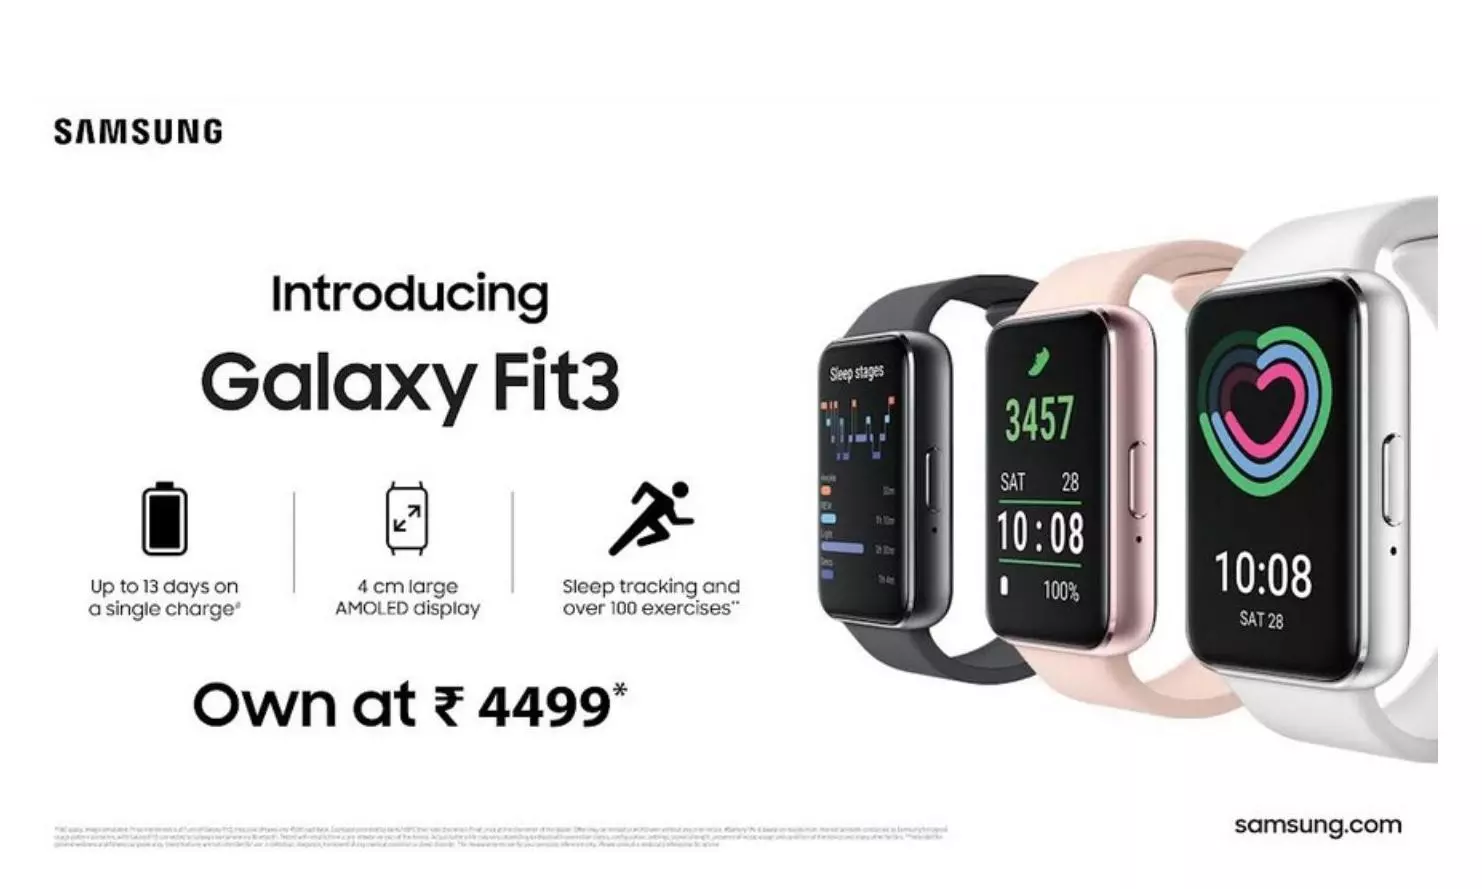 Samsung Galaxy Fit3 Features Price in India